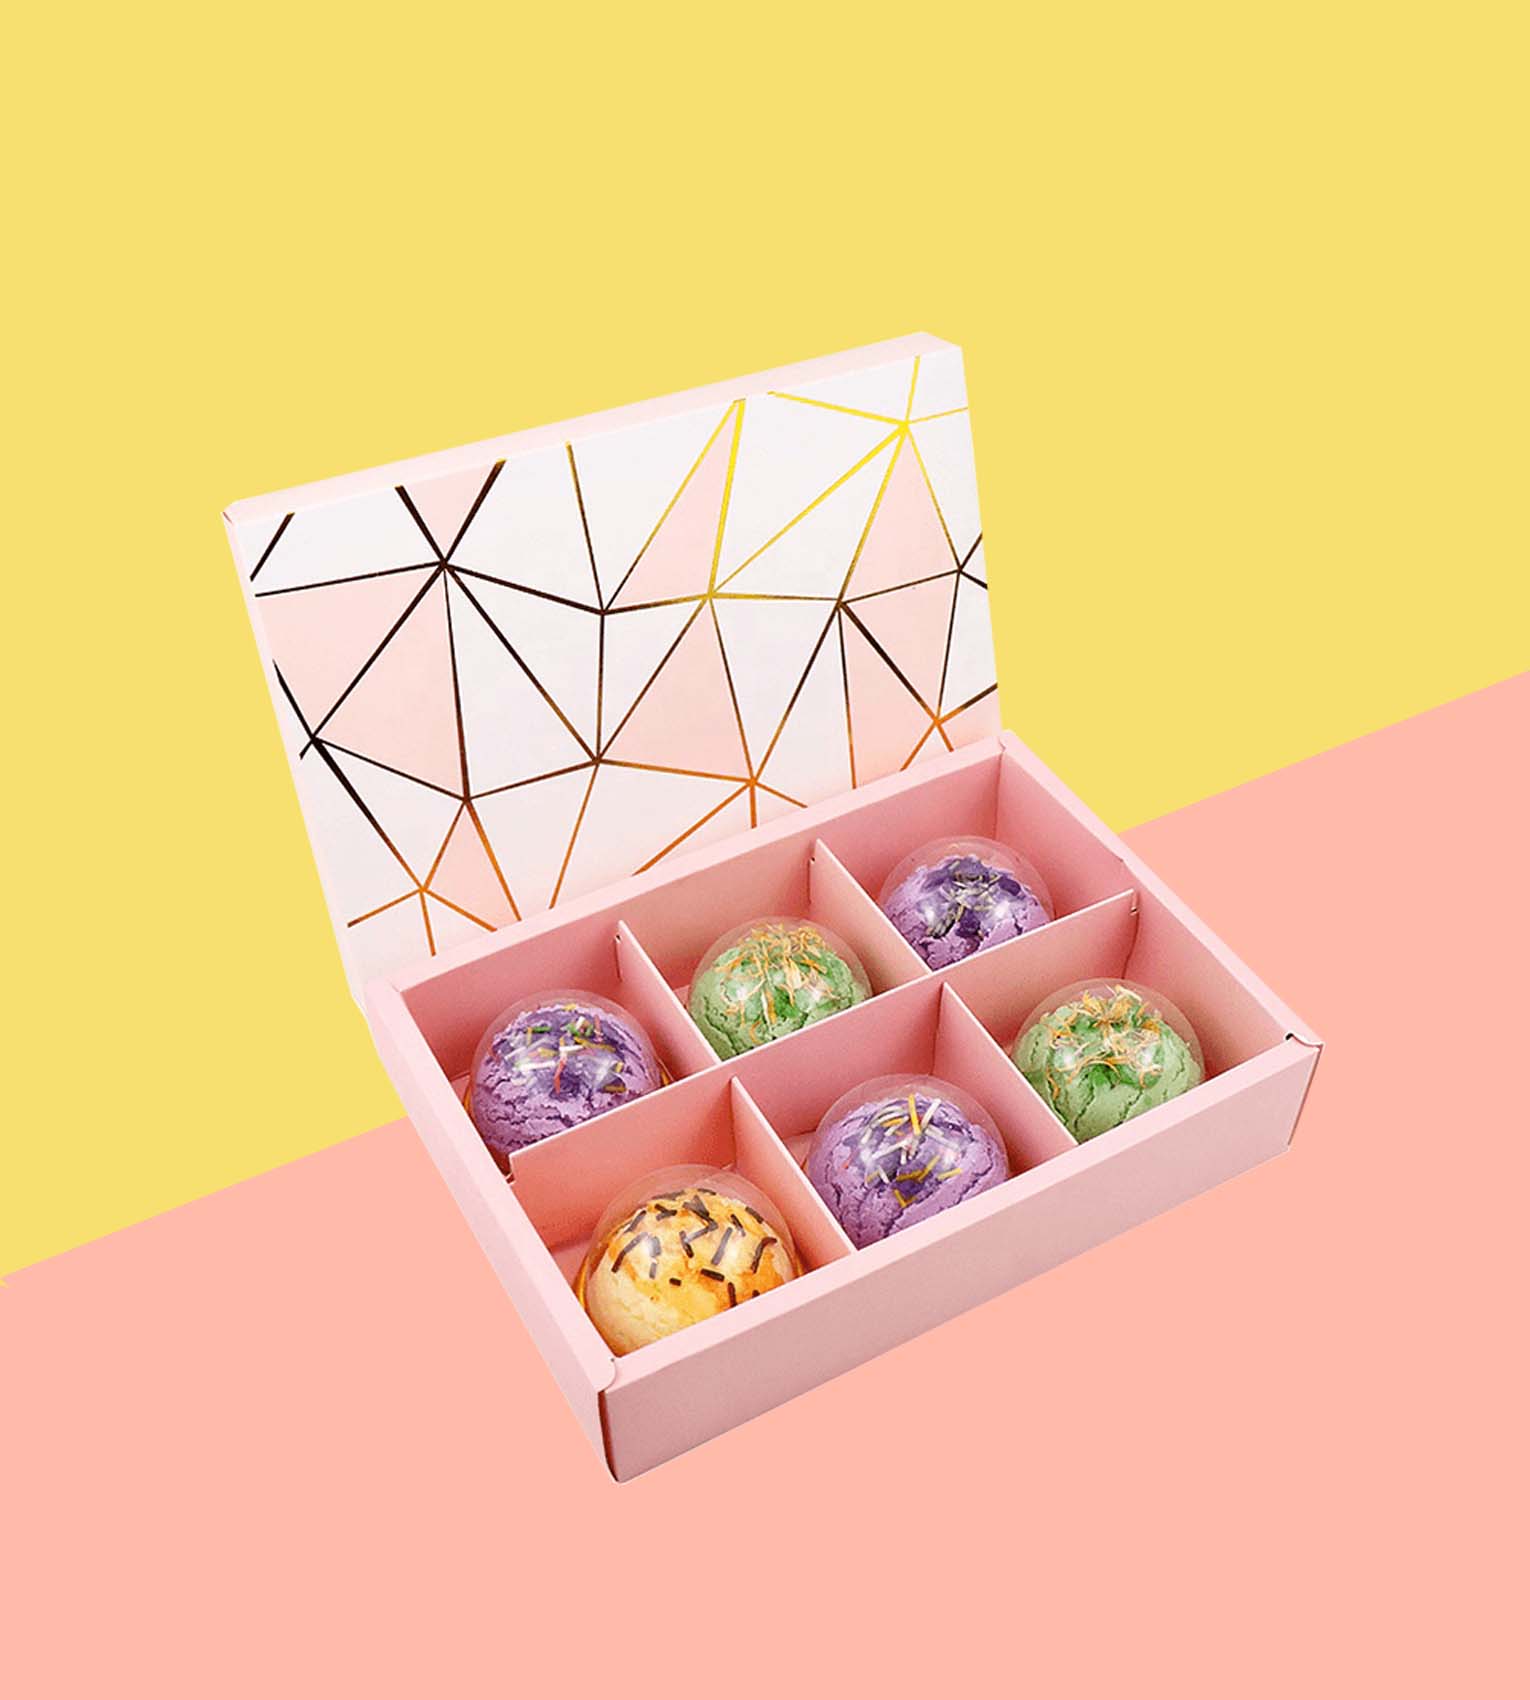 Bath Bomb Boxes With Inserts